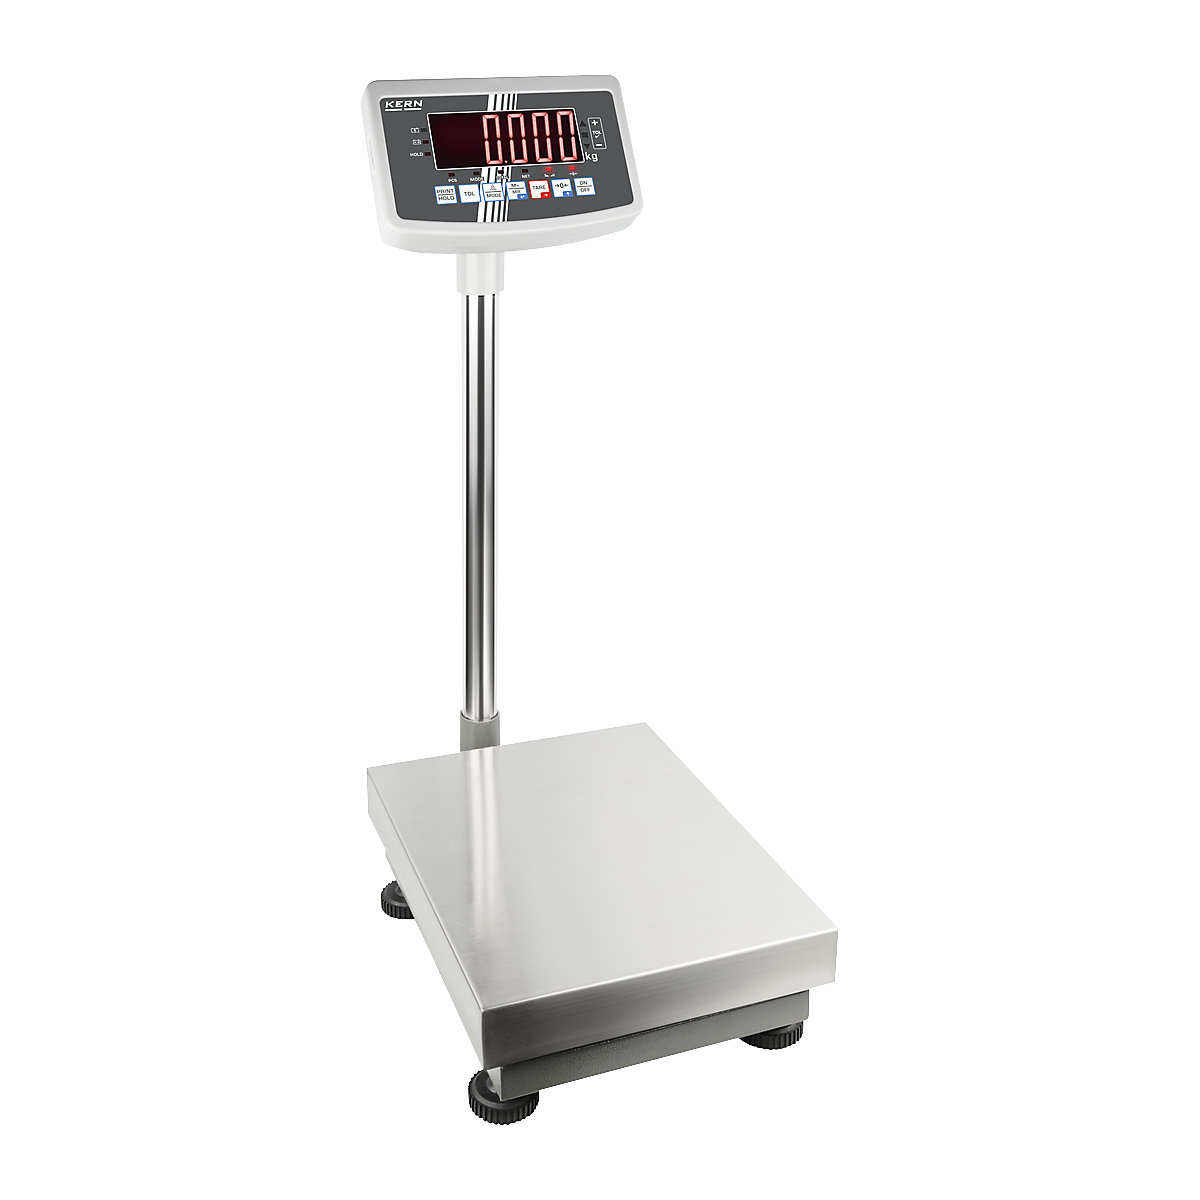 Platform scales – KERN, with large weighing plate, weighing range up to 60 kg, read-out accuracy 5 g-1